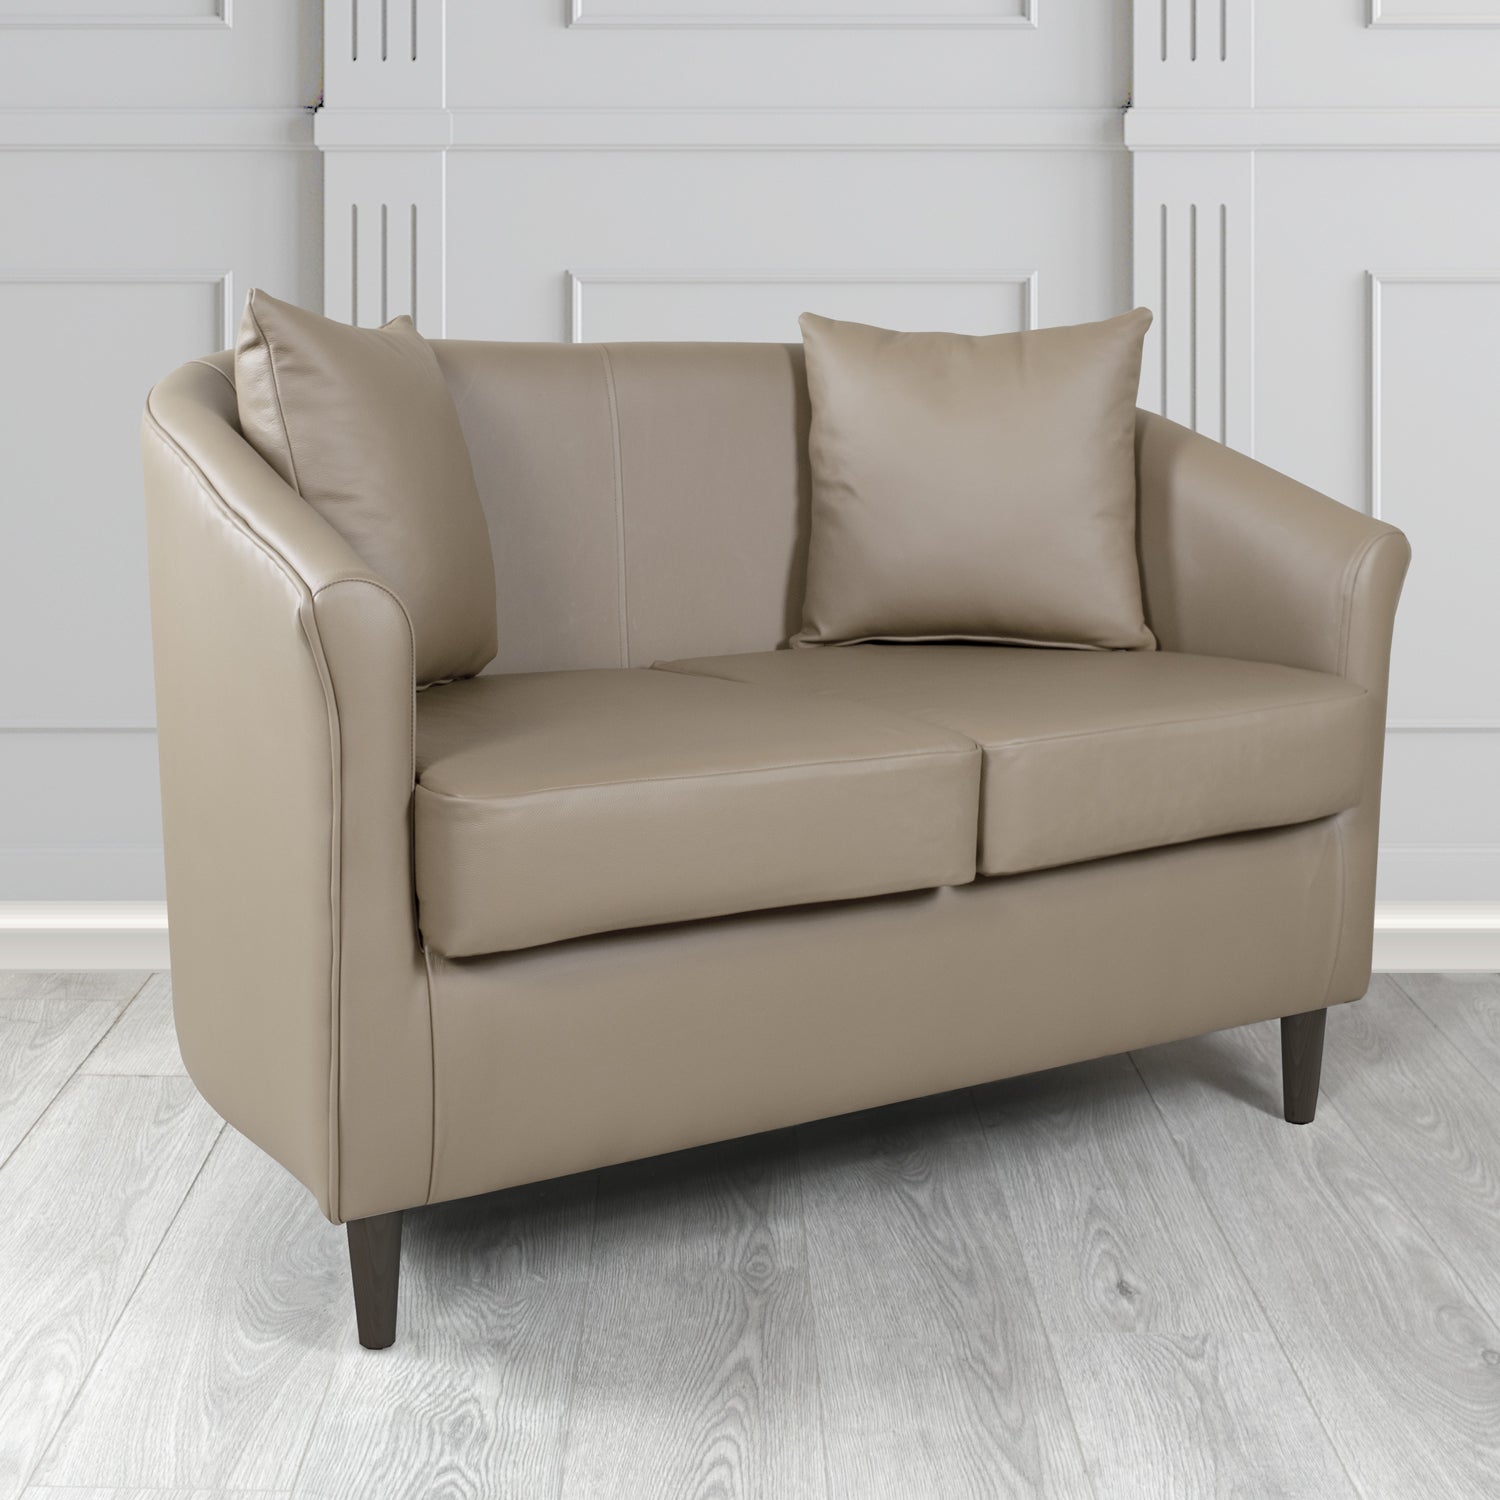 St Tropez Shelly Silver Birch Crib 5 Genuine Leather 2 Seater Tub Sofa with Scatter Cushions - The Tub Chair Shop